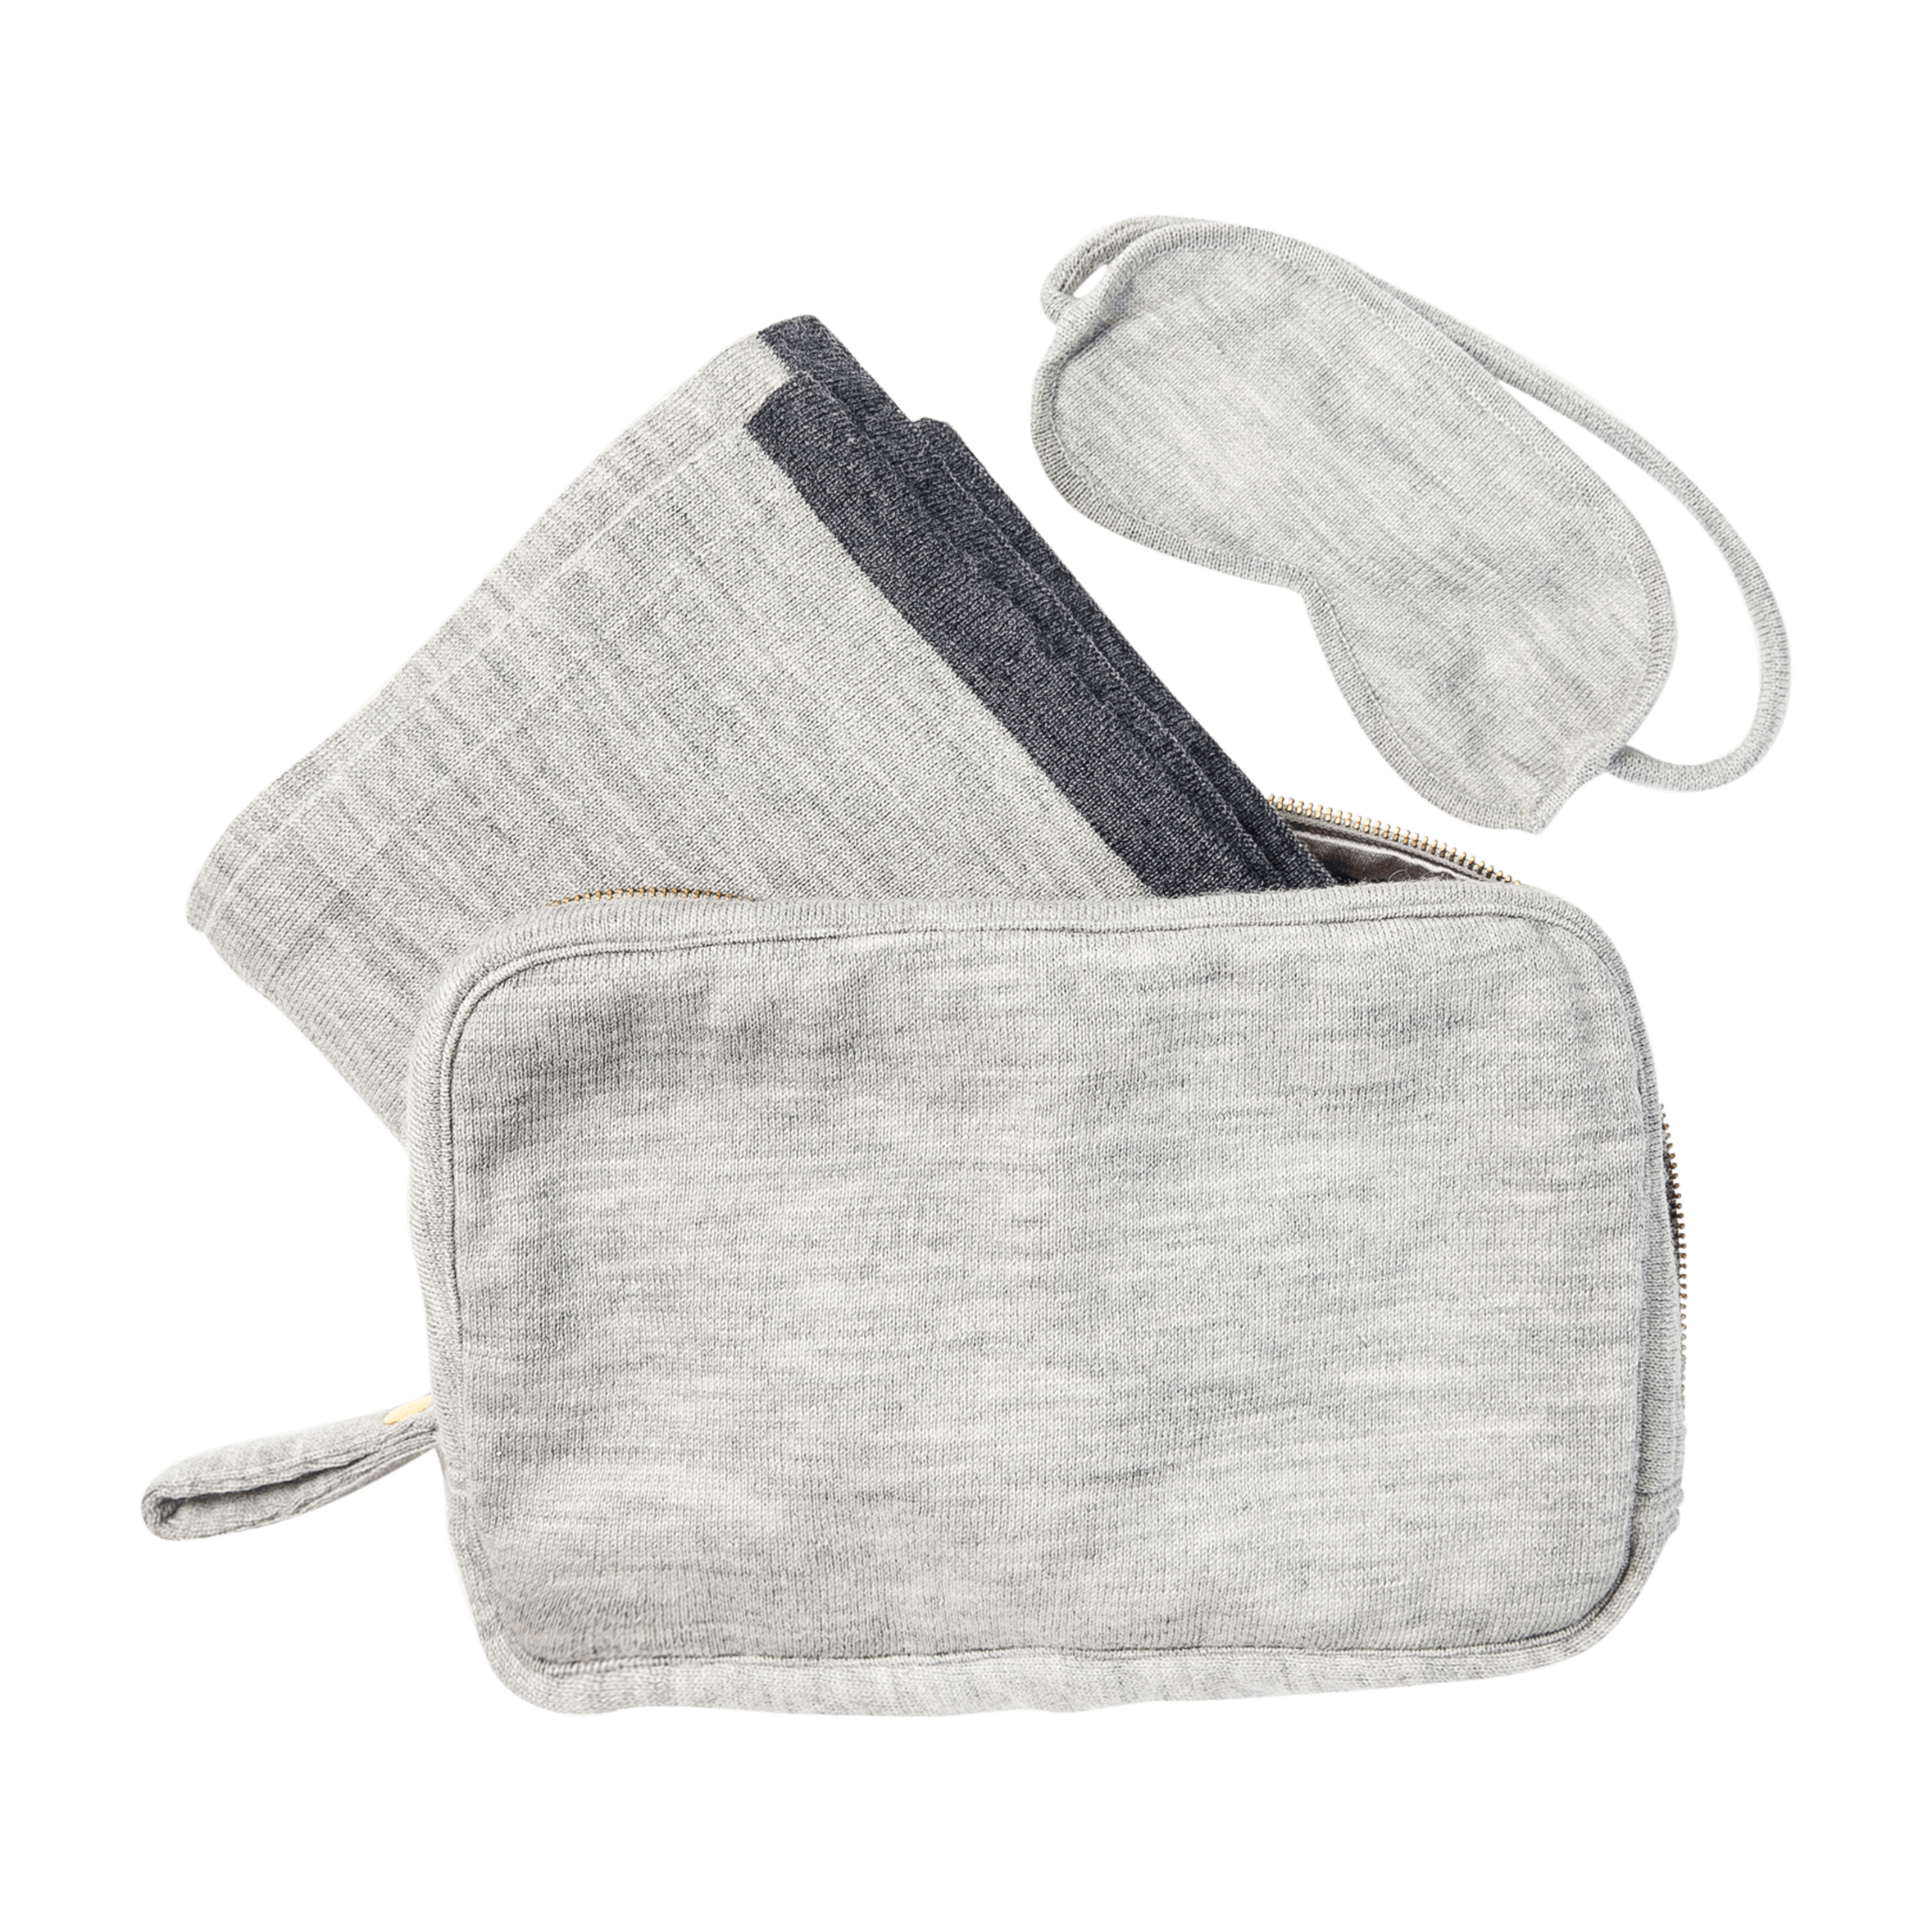 Merino Wool Travel Set in Light Grey which includes an Eye Mask, a Blanket and a Travel Case